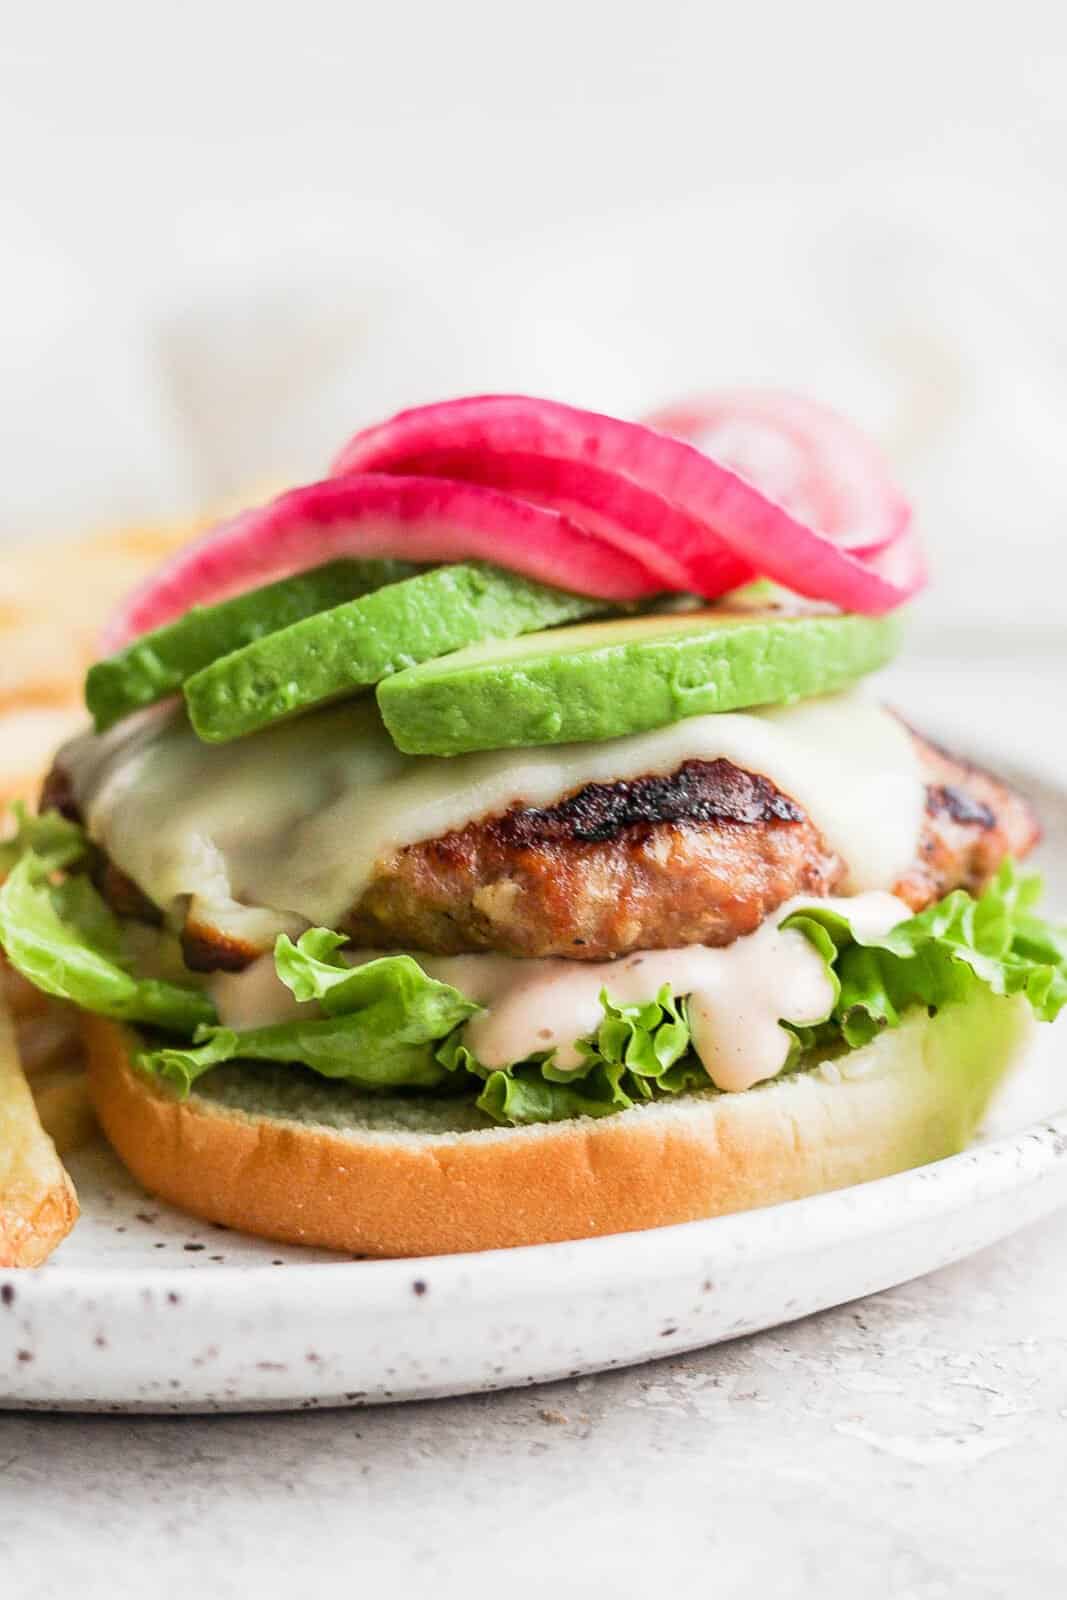 An avocado turkey burger on a bun with lettuce, burger sauce, avocado, and pickled onions.